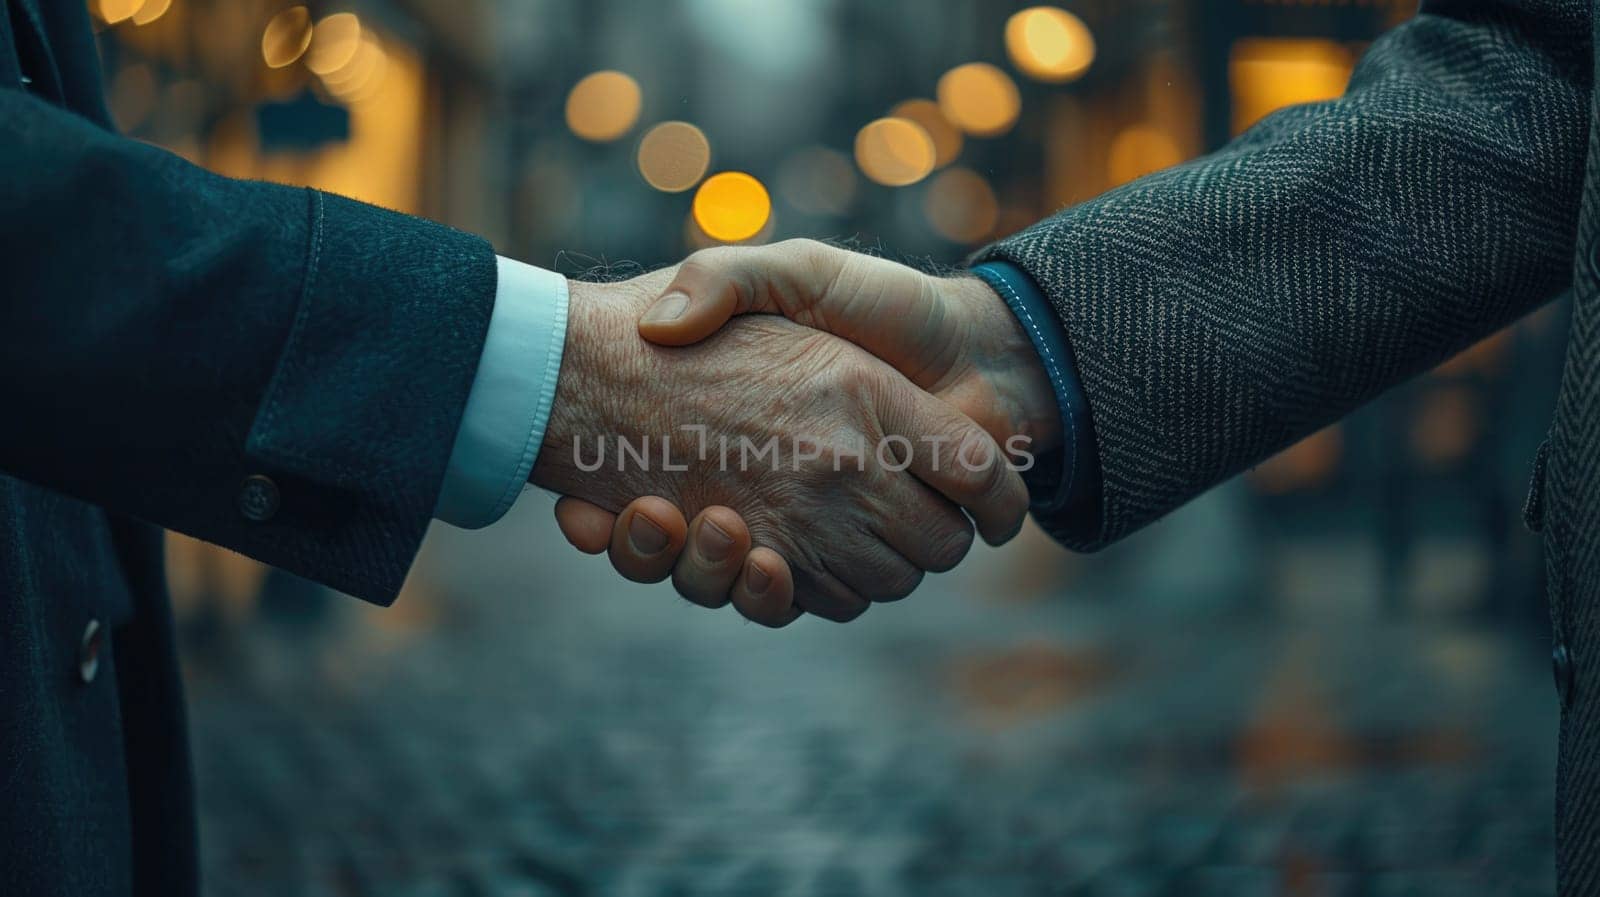 Close-up of a firm handshake between two business partners, symbolizing trust and agreement, with a blurred city background.